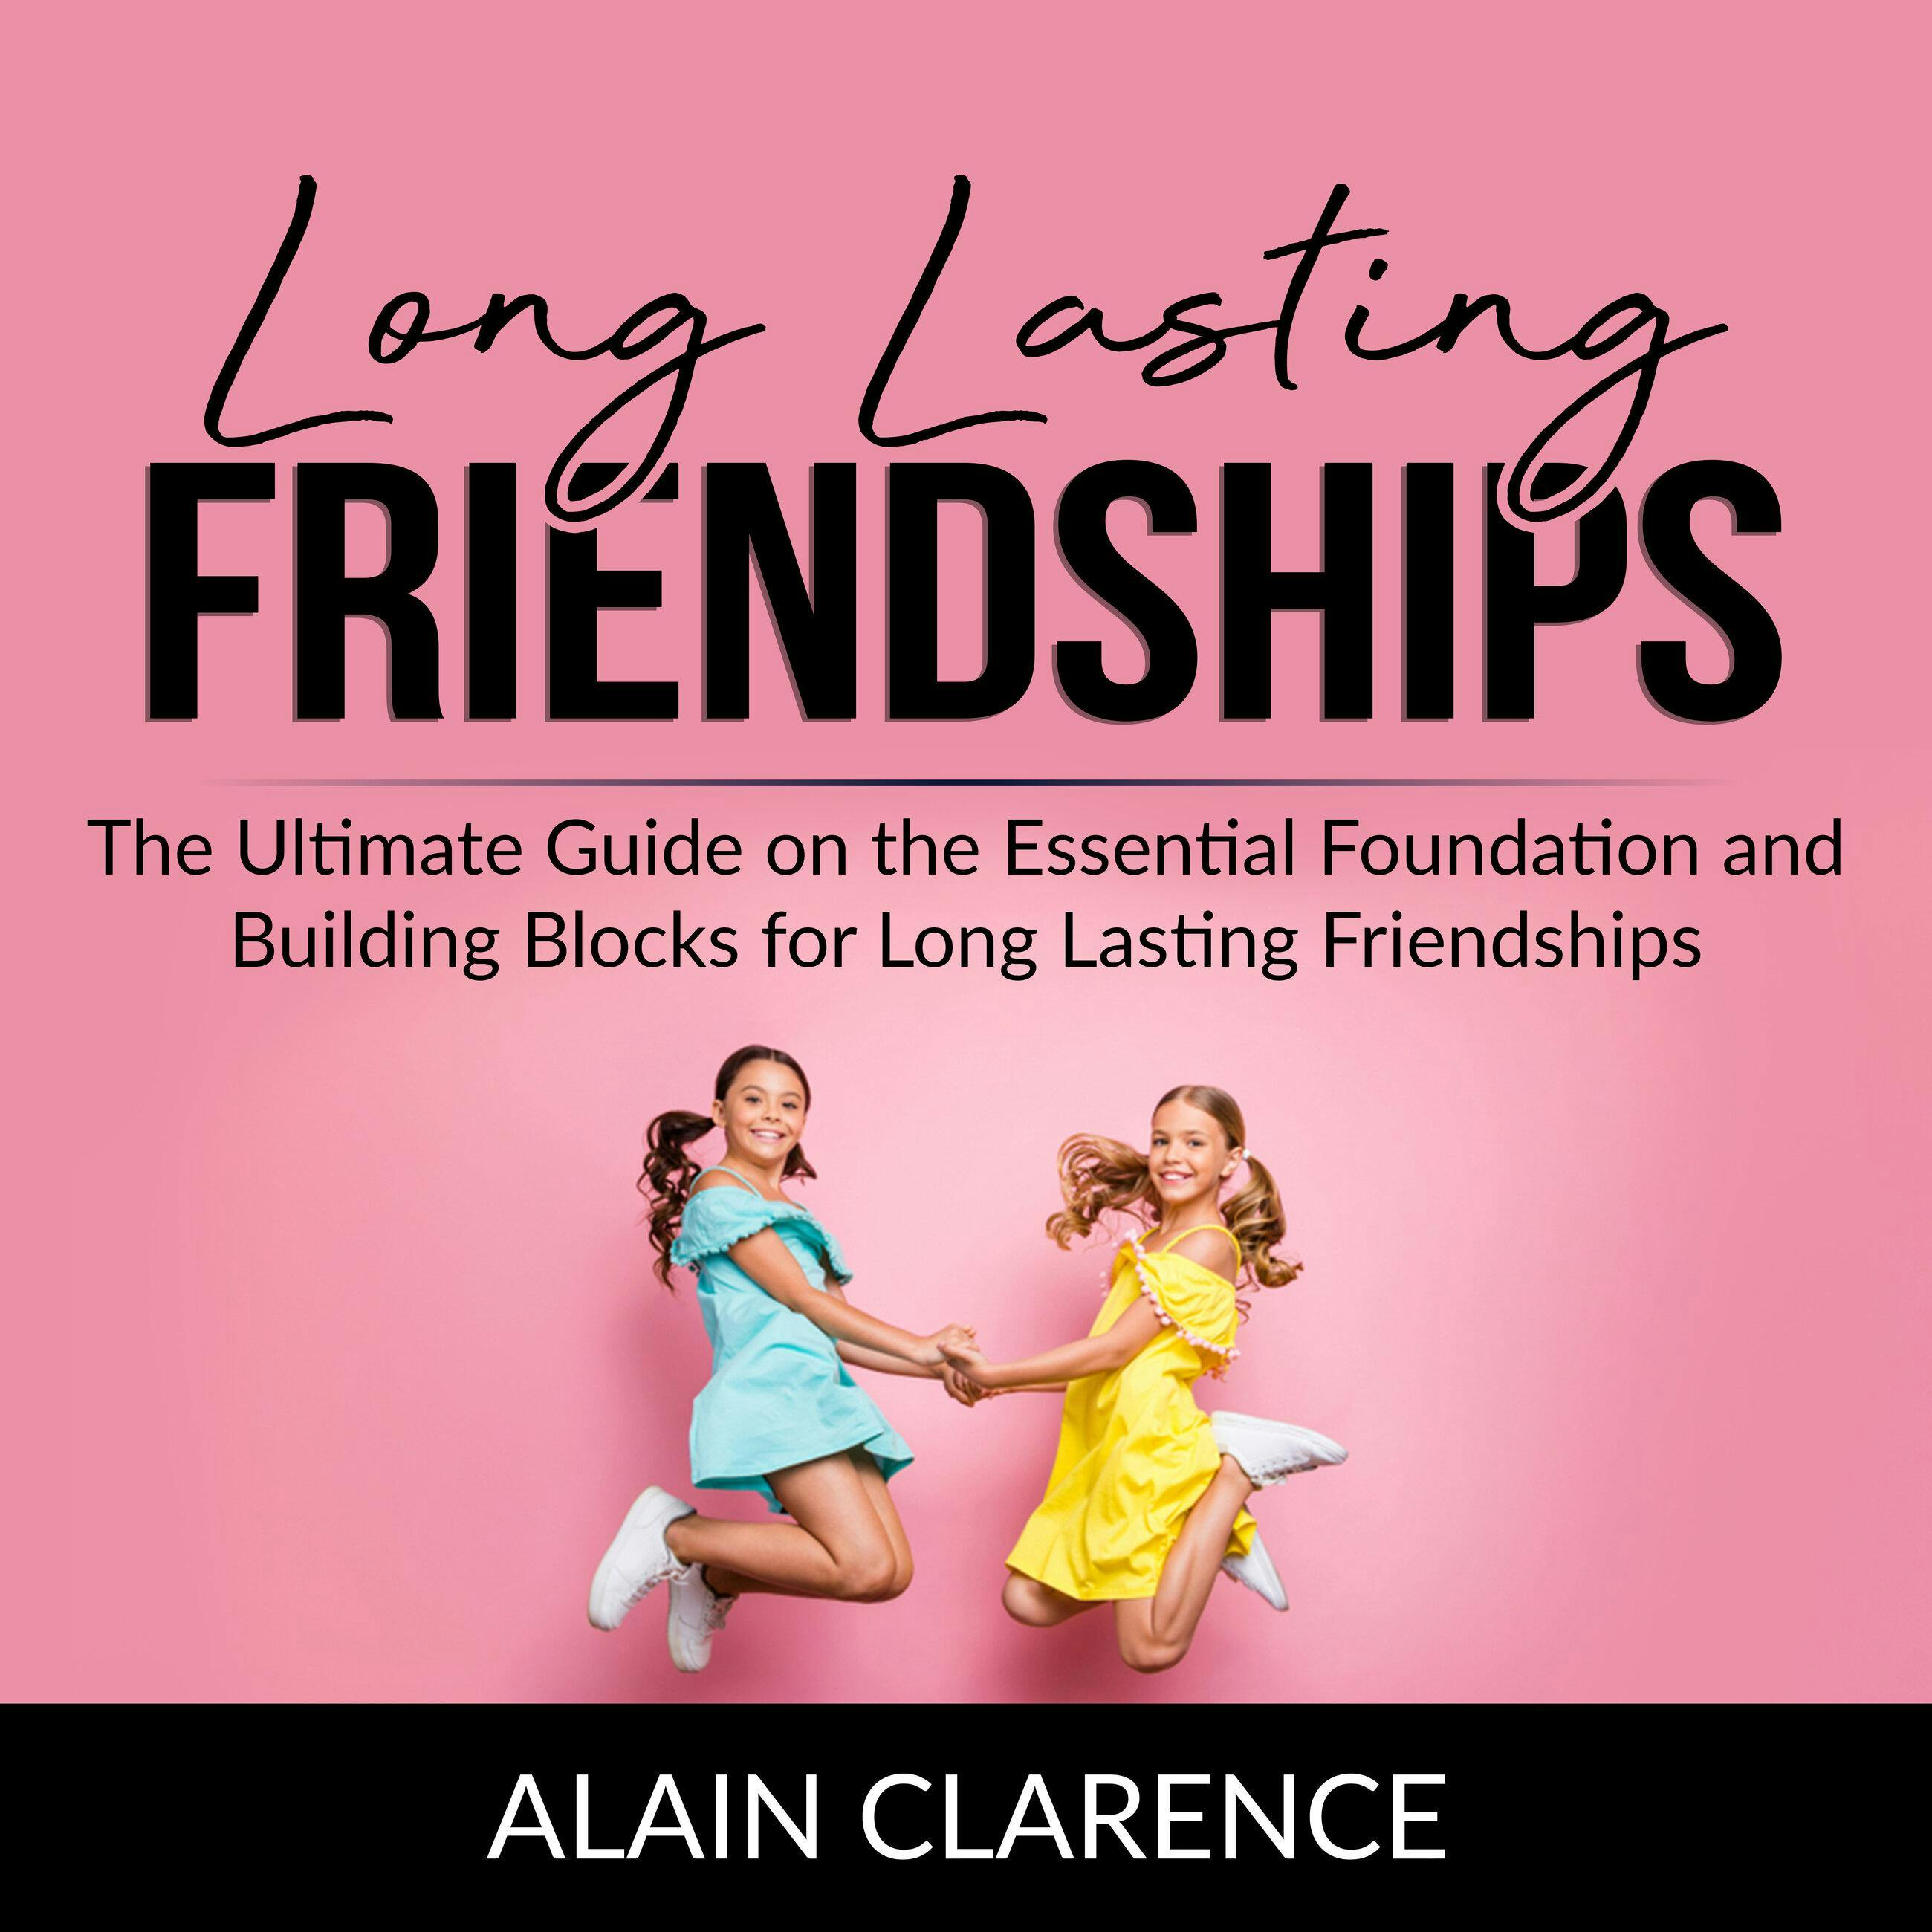 Long Lasting Friendships: The Ultimate Guide on the Essential Foundation and Building Blocks for Long Lasting Friendships - Alain Clarence